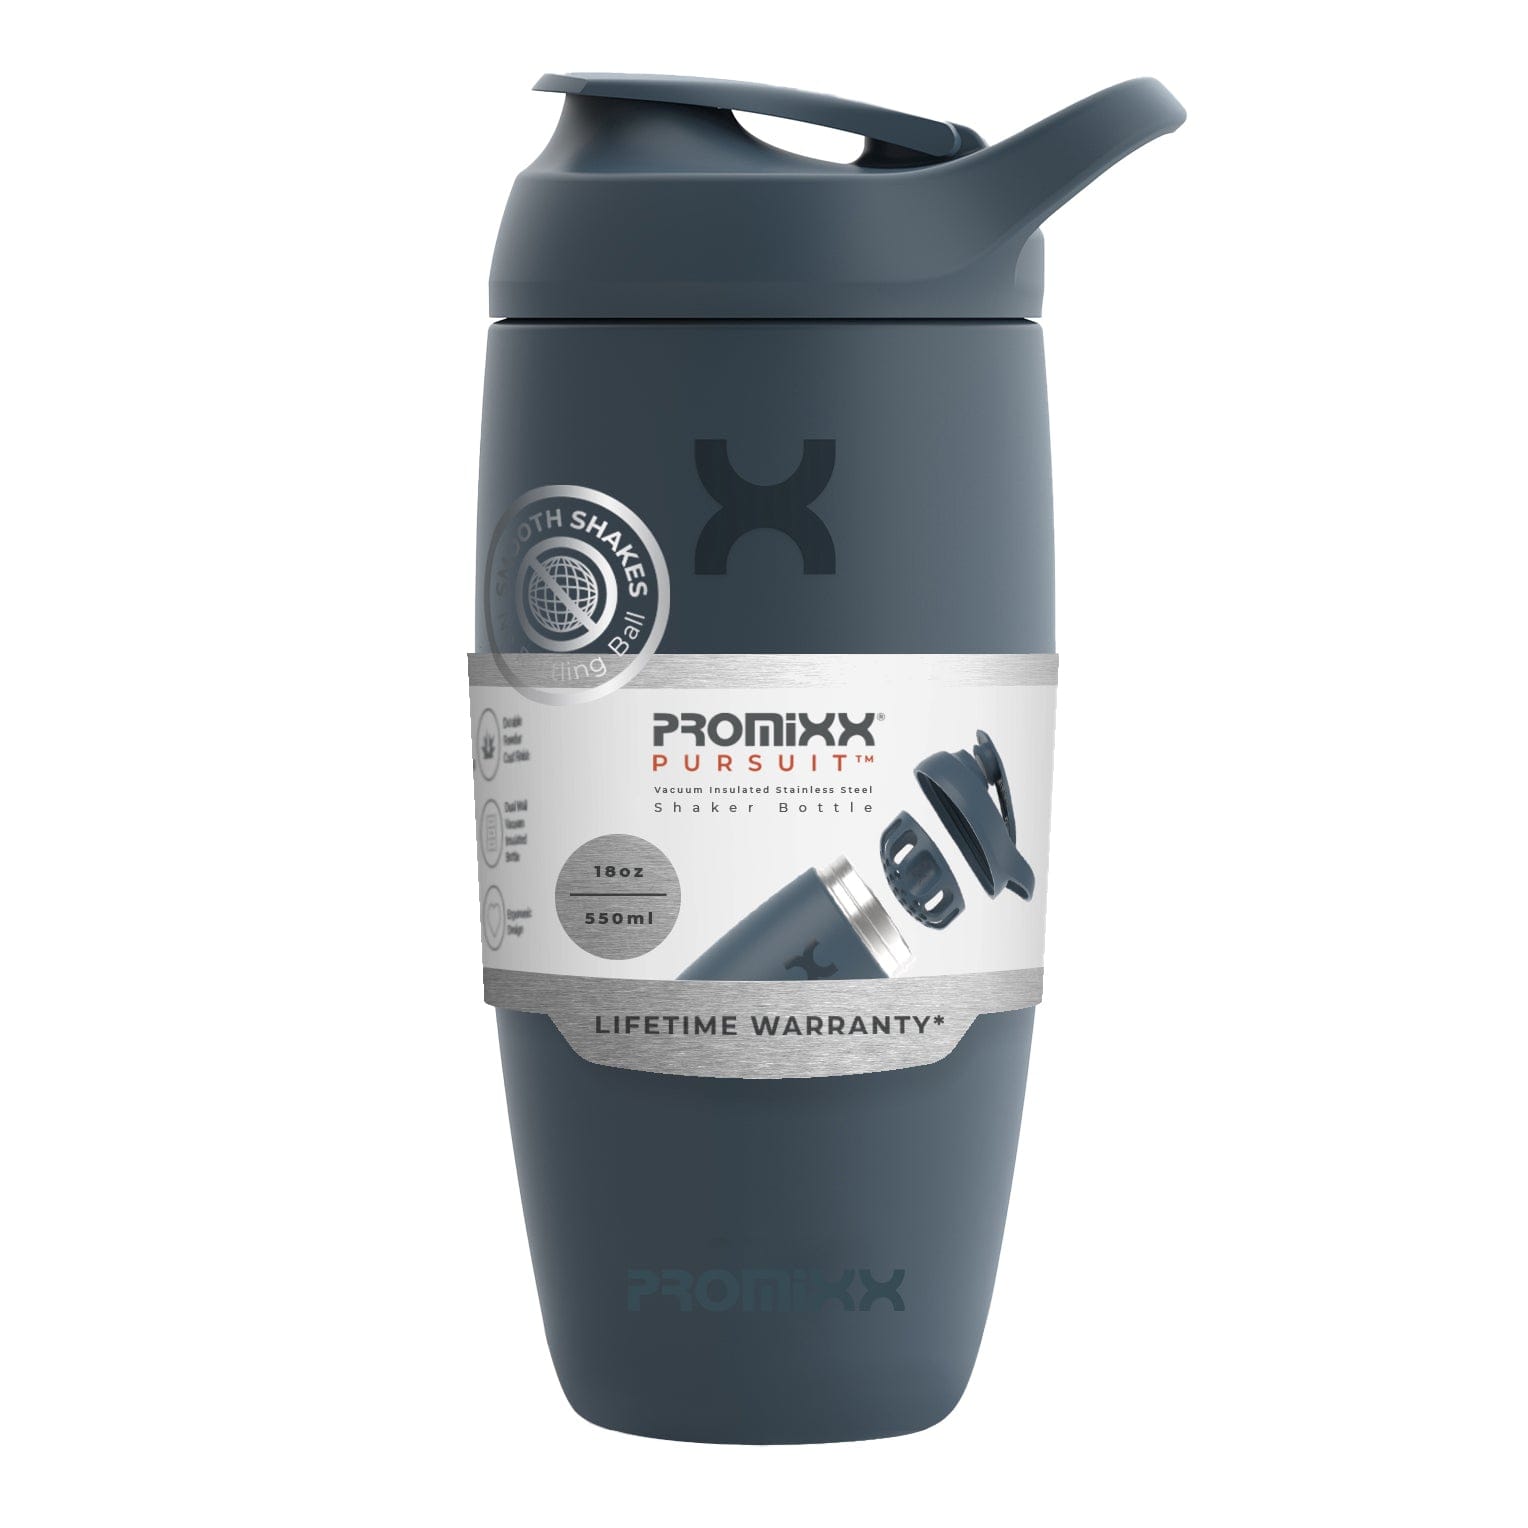 Sprællemand stemning killing PROMiXX PURSUIT Insulated Protein Shaker Bottle | PROMiXX